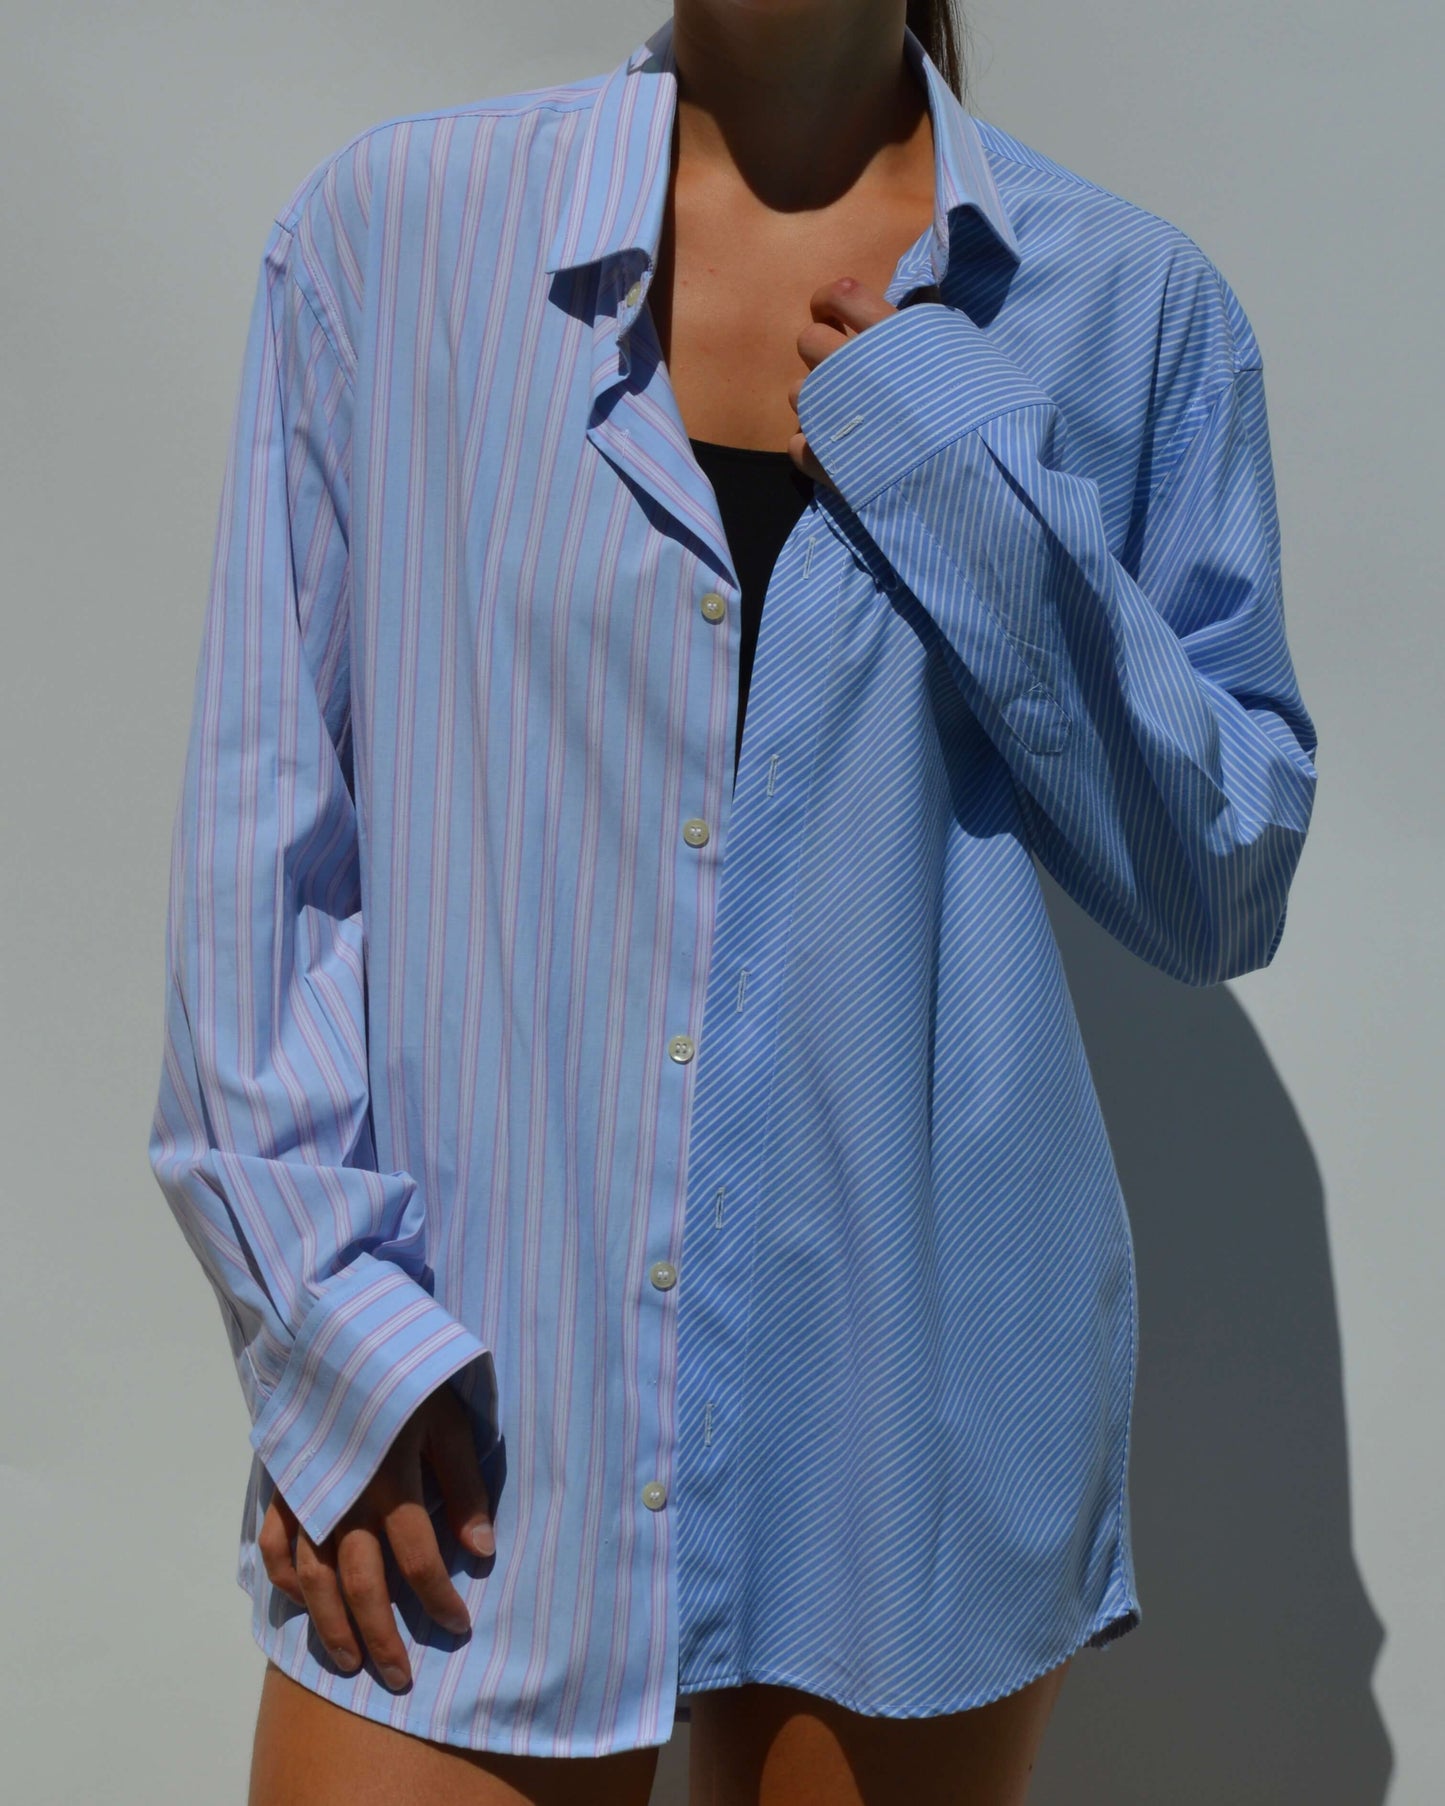 DUO Shirt - Shades Of Blue (S/L)